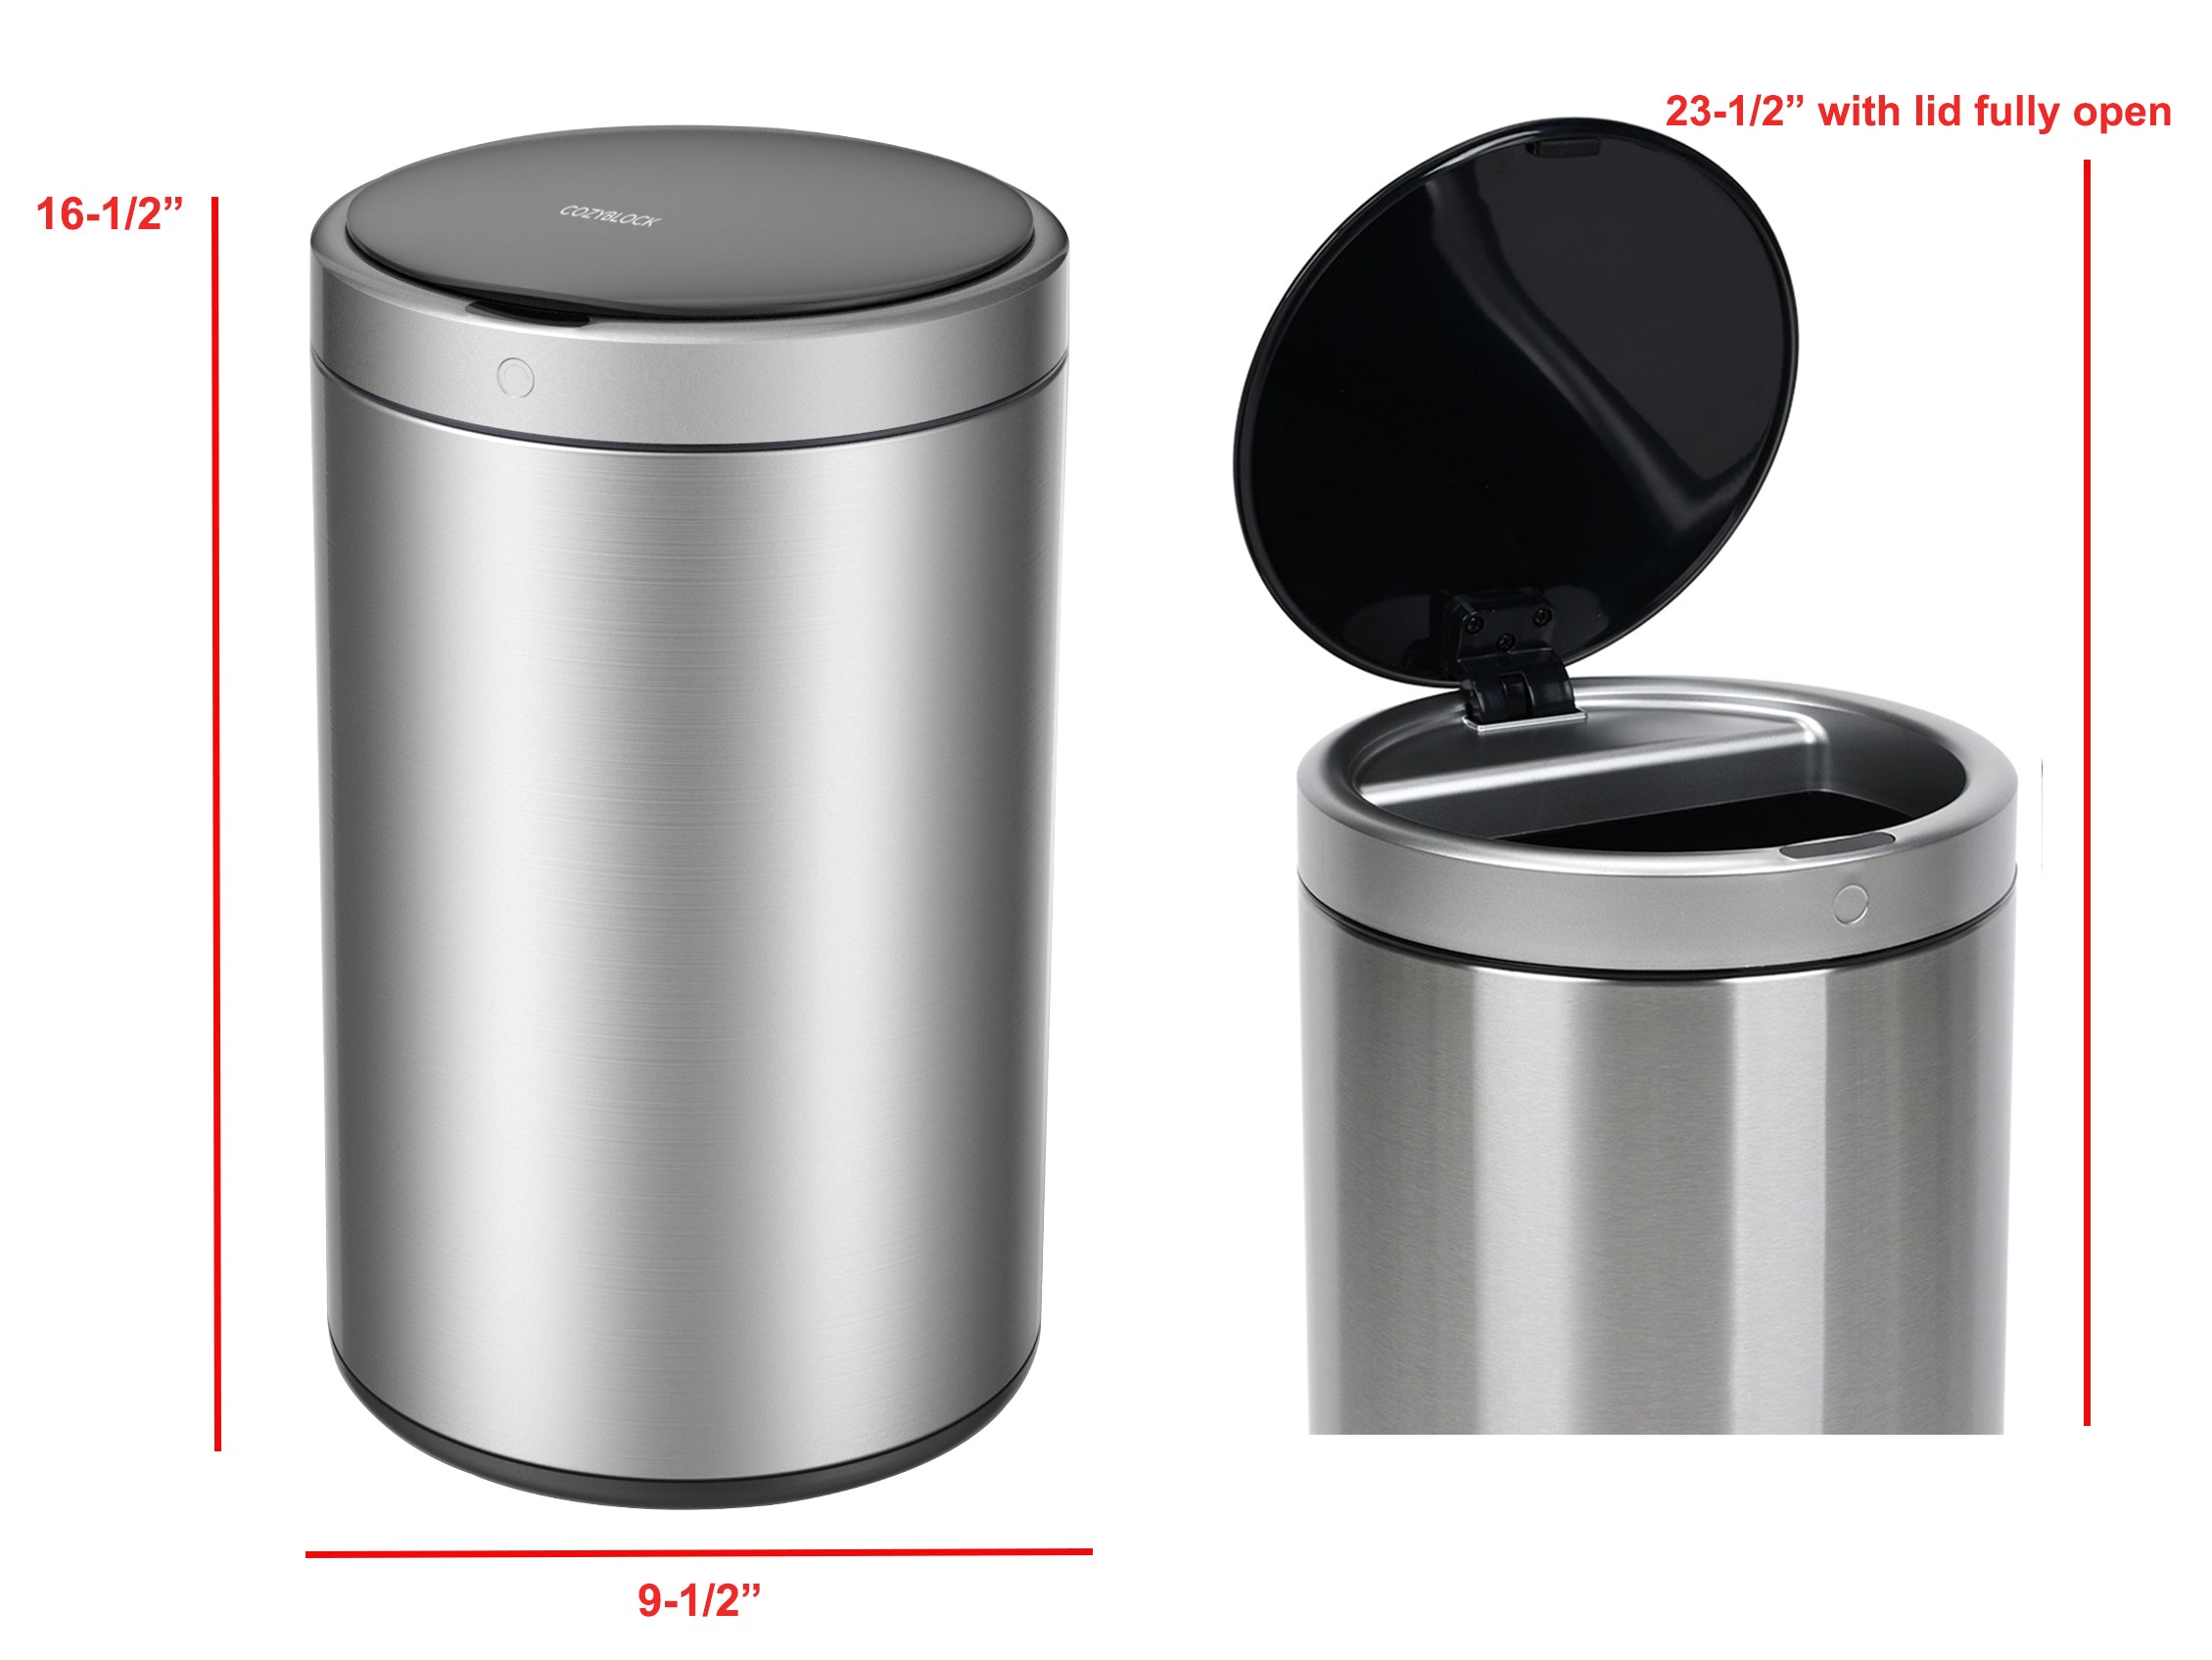 CozyBlock 3.2 Gallon 12L Automatic Trash Can, Stainless Steel Touchless Motion Sensor Bin, Quiet Soft Close Lid, IPX4 Waterproof